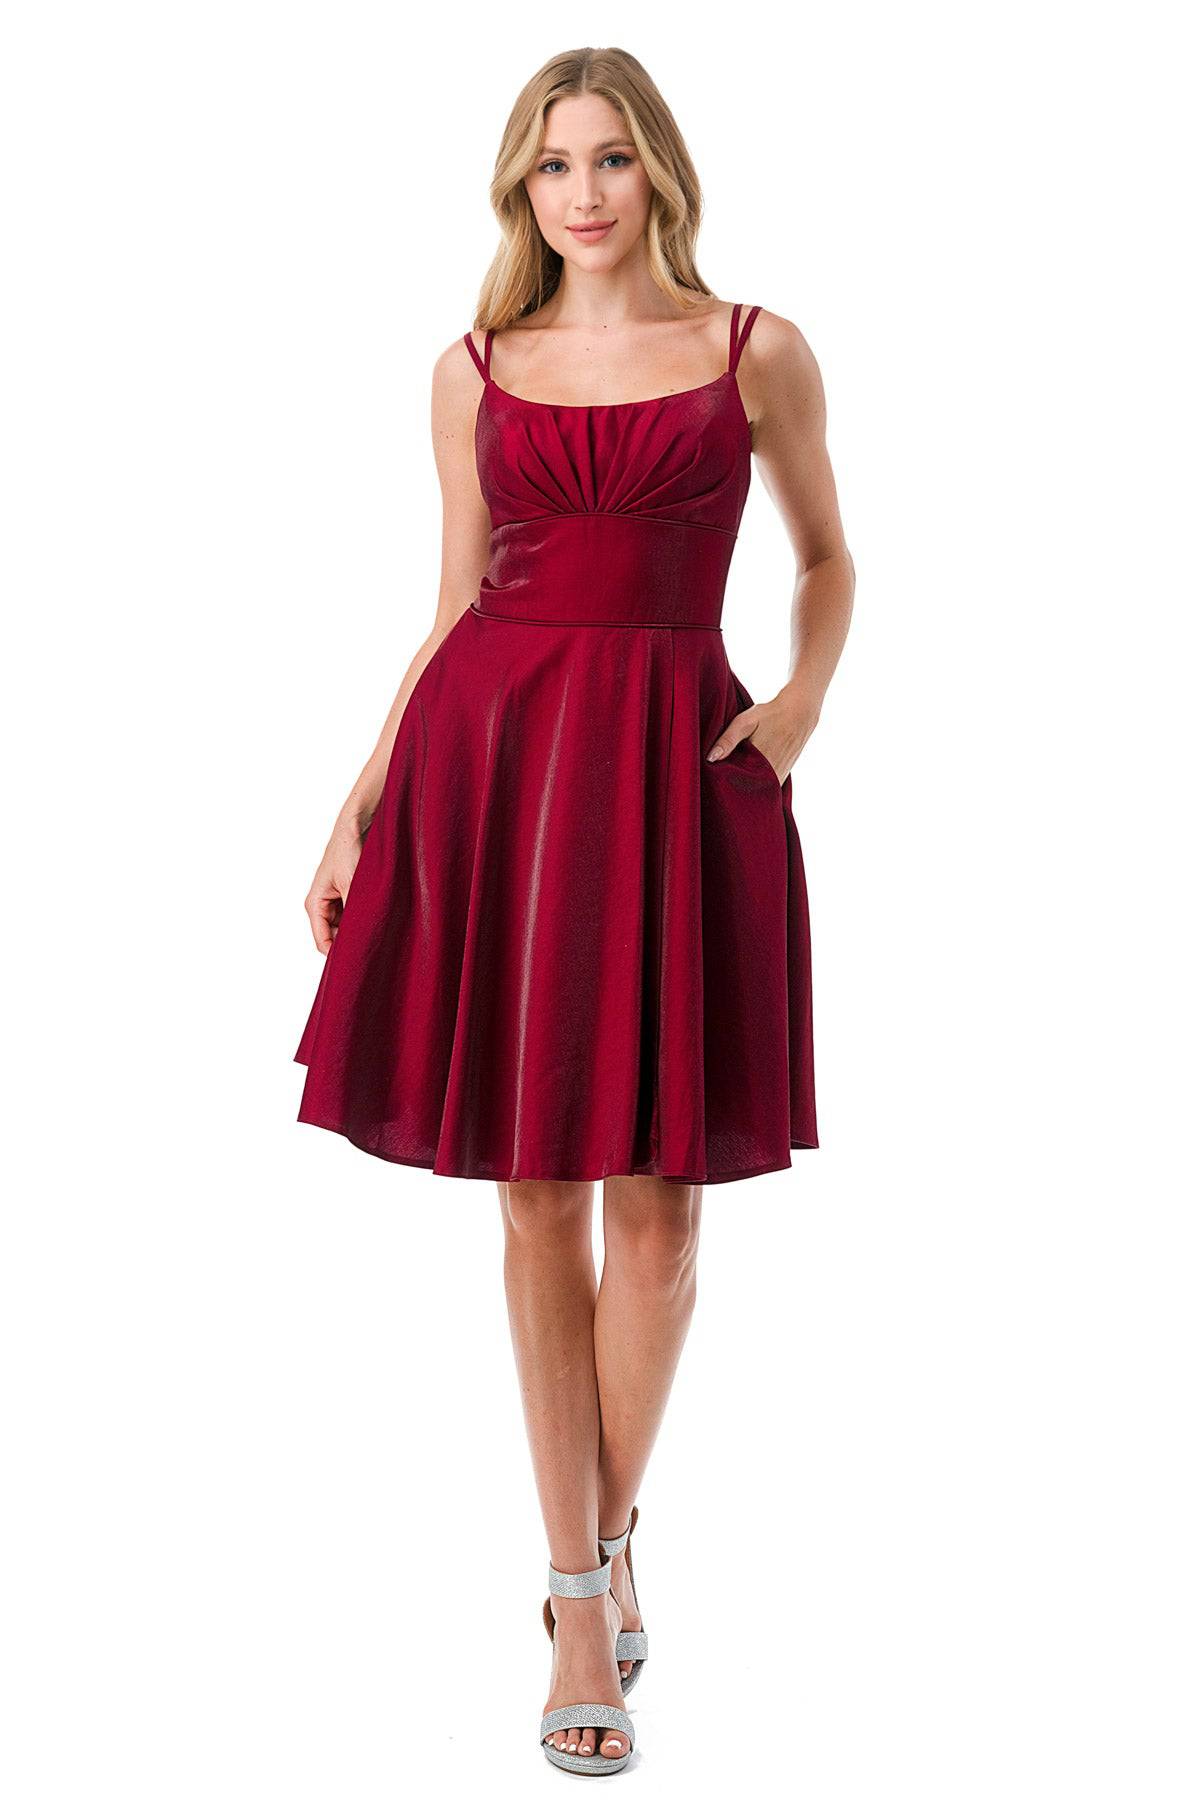 Aspeed S2741M Above Knee Short Dress with Pockets - NORMA REED